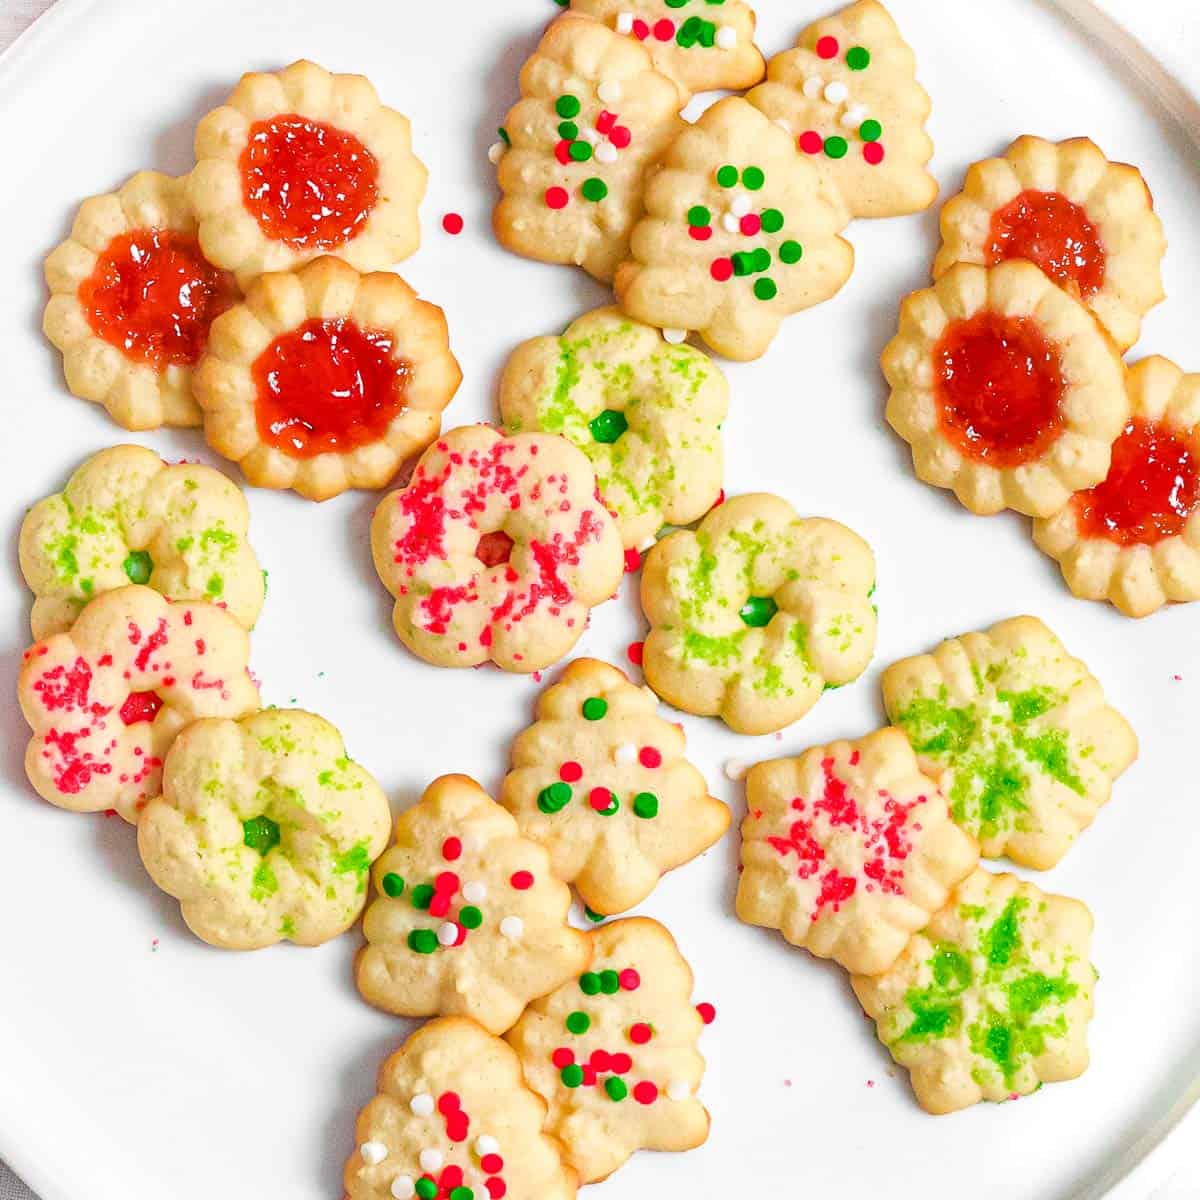 Christmas spritz cookies with red and green Christmas sprinkles on a plate.